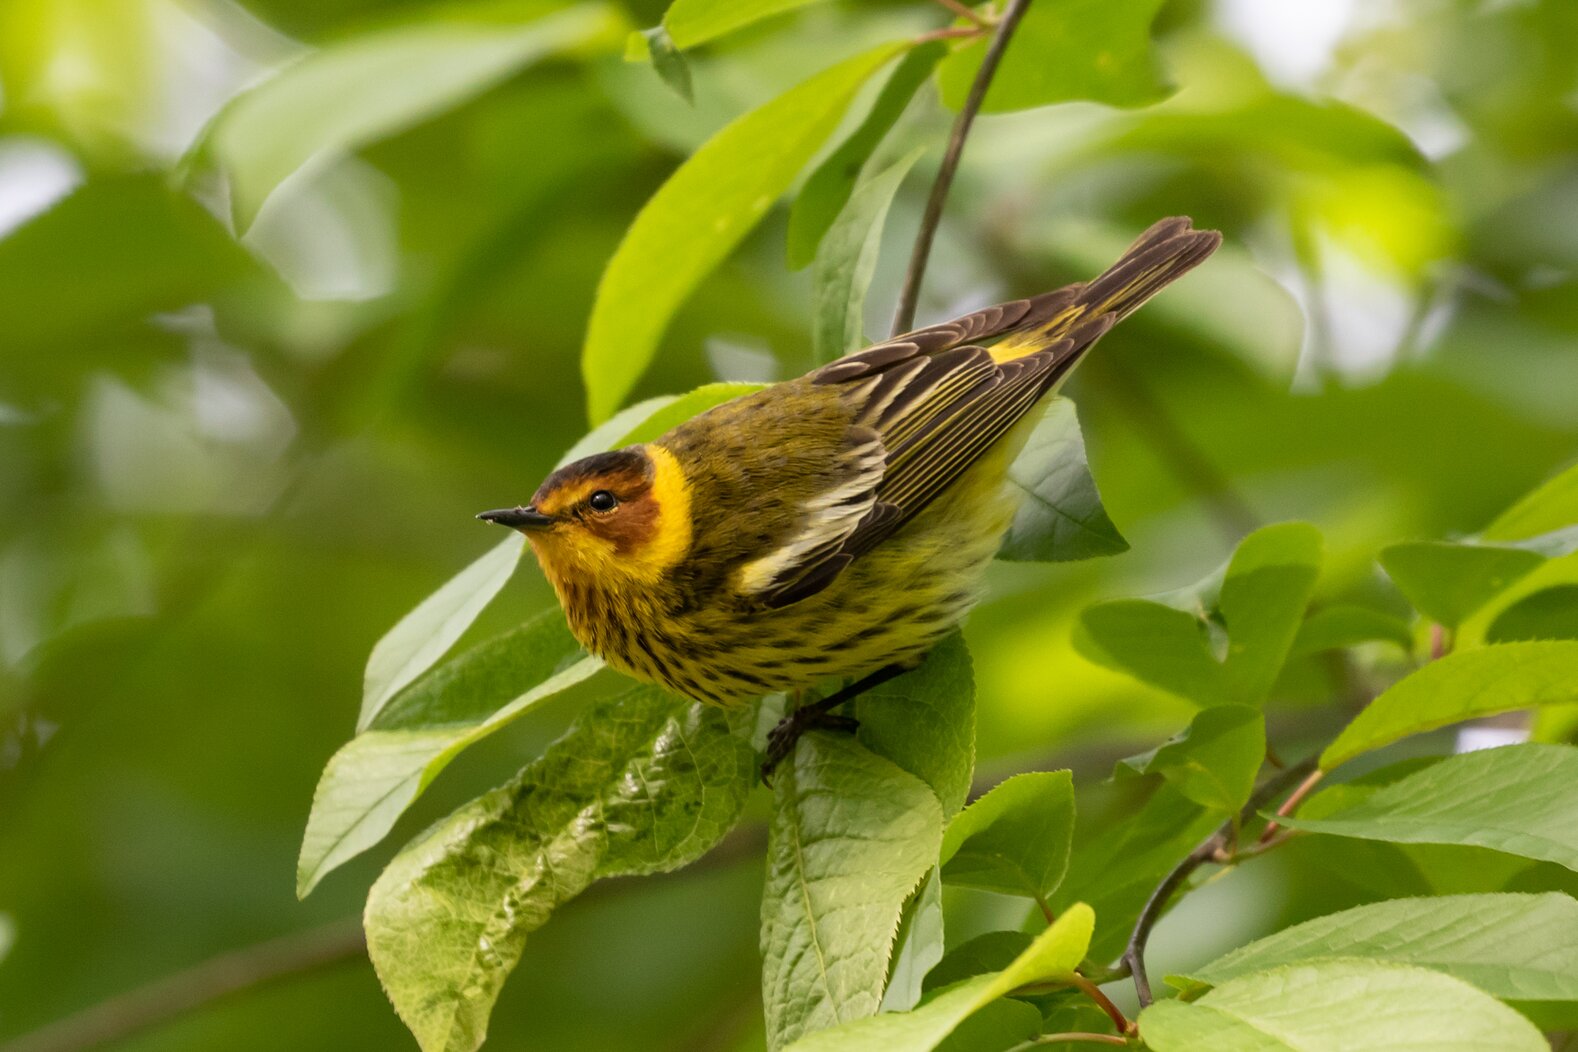 Prospect Park is one of the City’s principal migrant hotspots, attracting over 30 species of warbler each year, including the Cape May Warbler. Photo: Ryan F. Mandelbaum